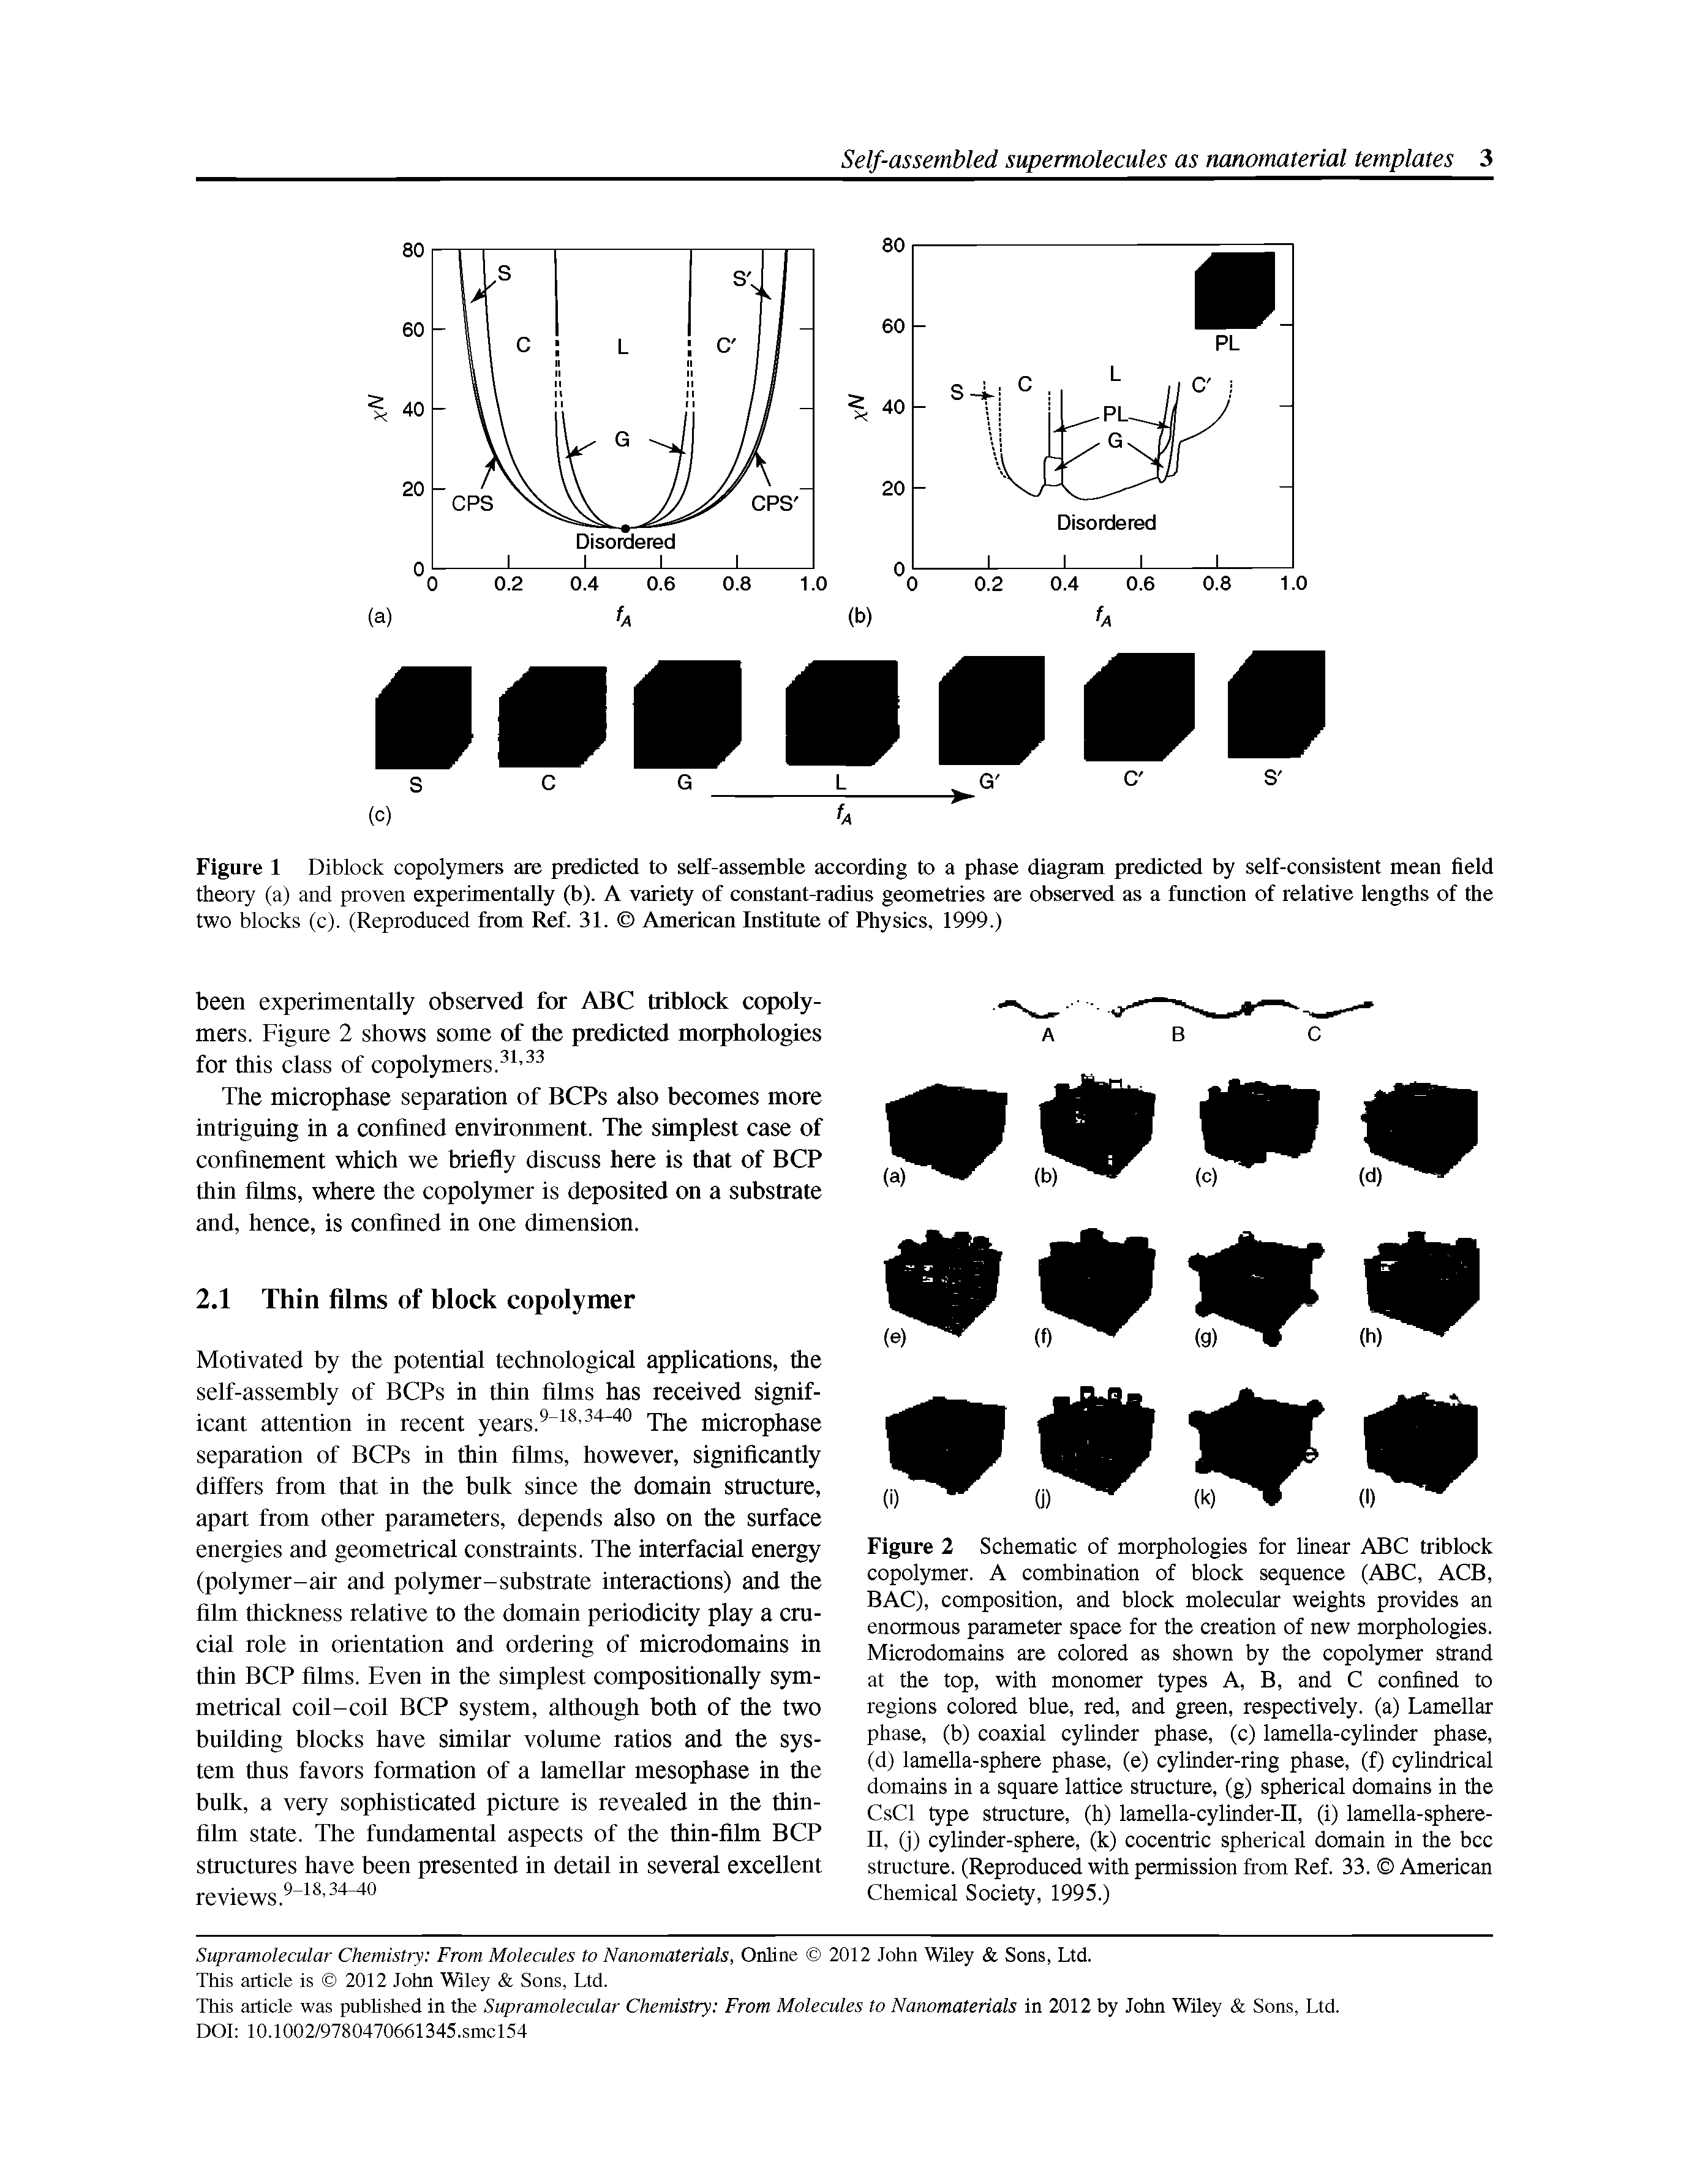 Figure 1 Diblock copolymers are predicted to self-assemble according to a phase diagram predicted by self-consistent mean field theory (a) and proven experimentally (b). A variety of constant-radius geometries are observed as a function of relative lengths of the two blocks (c). (Reproduced from Ref. 31. American Institute of Physics, 1999.)...